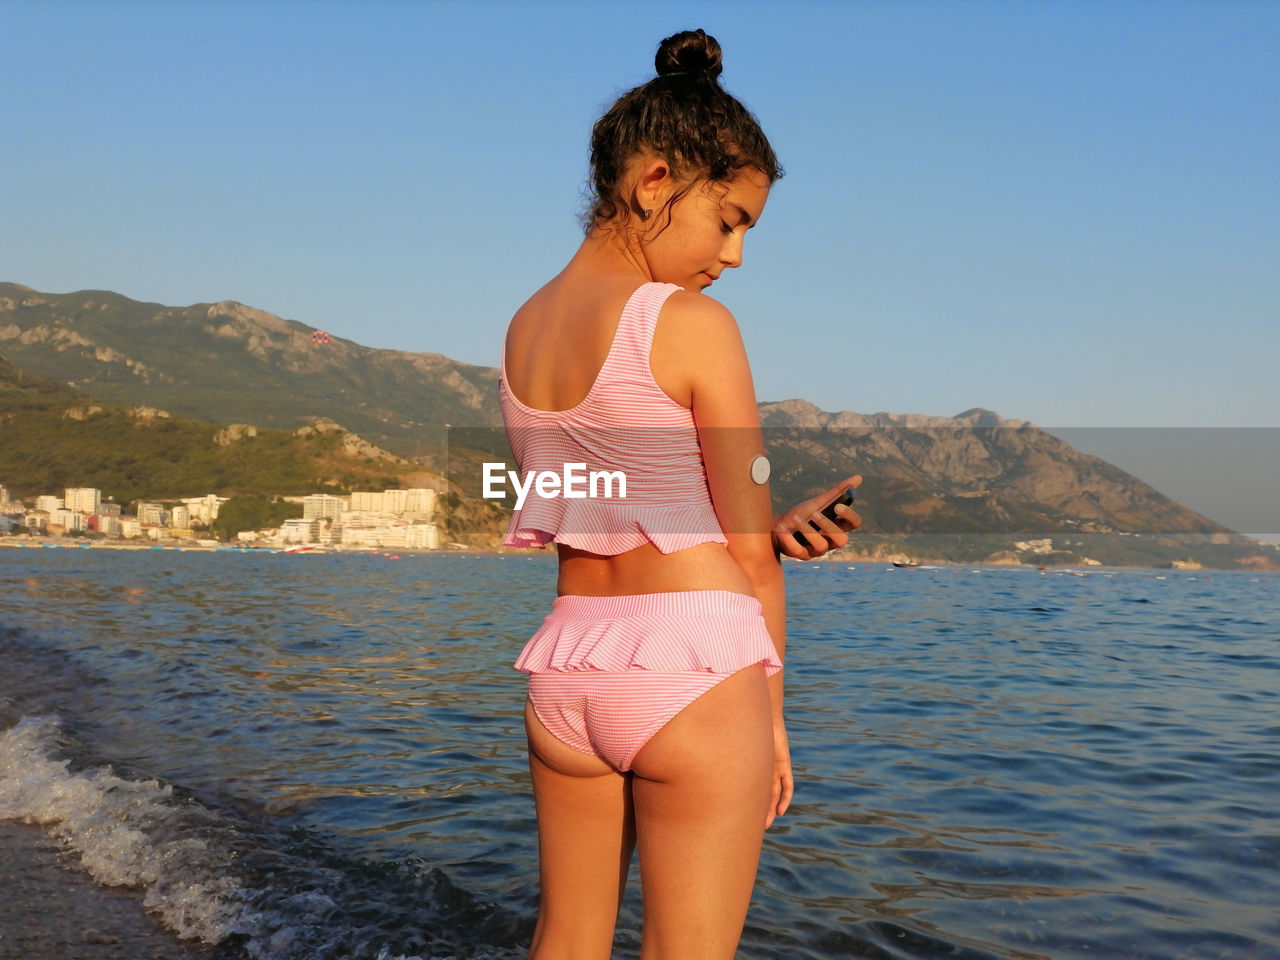 Life with diabetes. girl checks glucose level before enters the sea with cgm device